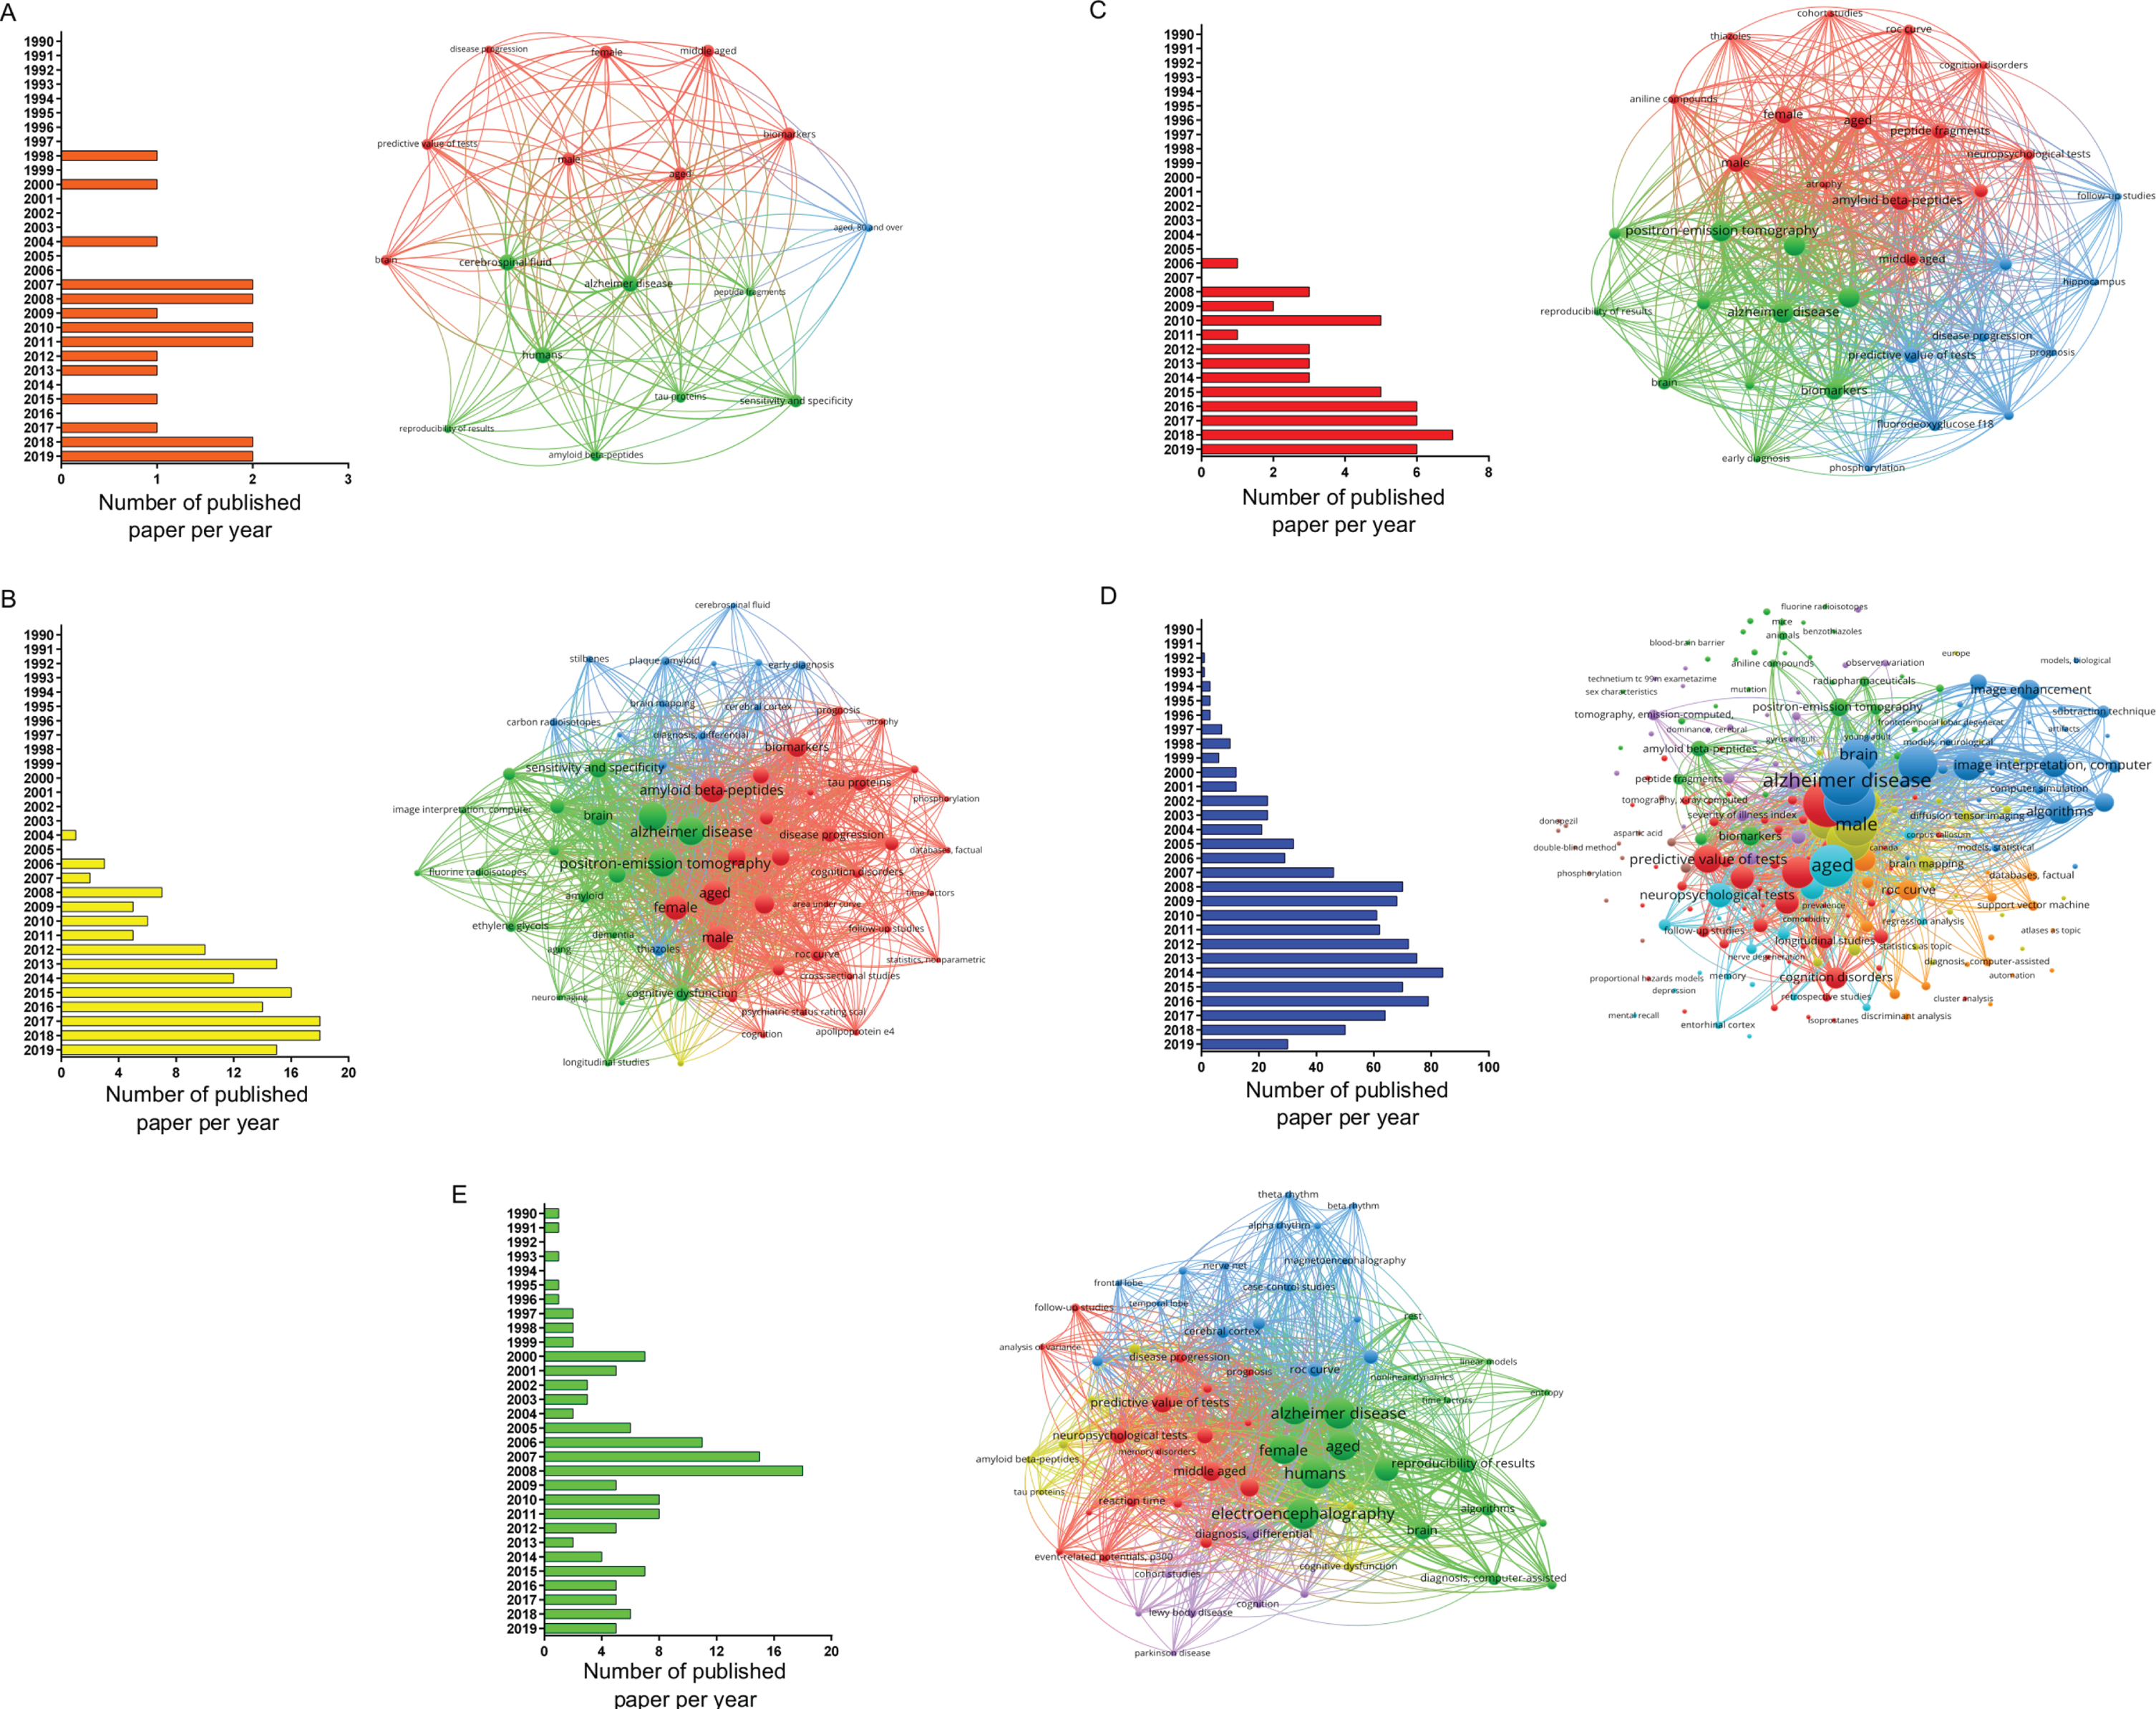 Papers selected for the different biomarkers using MeSH terms in PubMed database (from 1990 to 2019). Distribution per year of all articles found in the search and bibliometric map created by VOSviewer based on MeSH terms co-occurrence for: A) CSF, B) amyloid-PET, C) tau-PET, D) MRI, and E) EEG biomarkers.